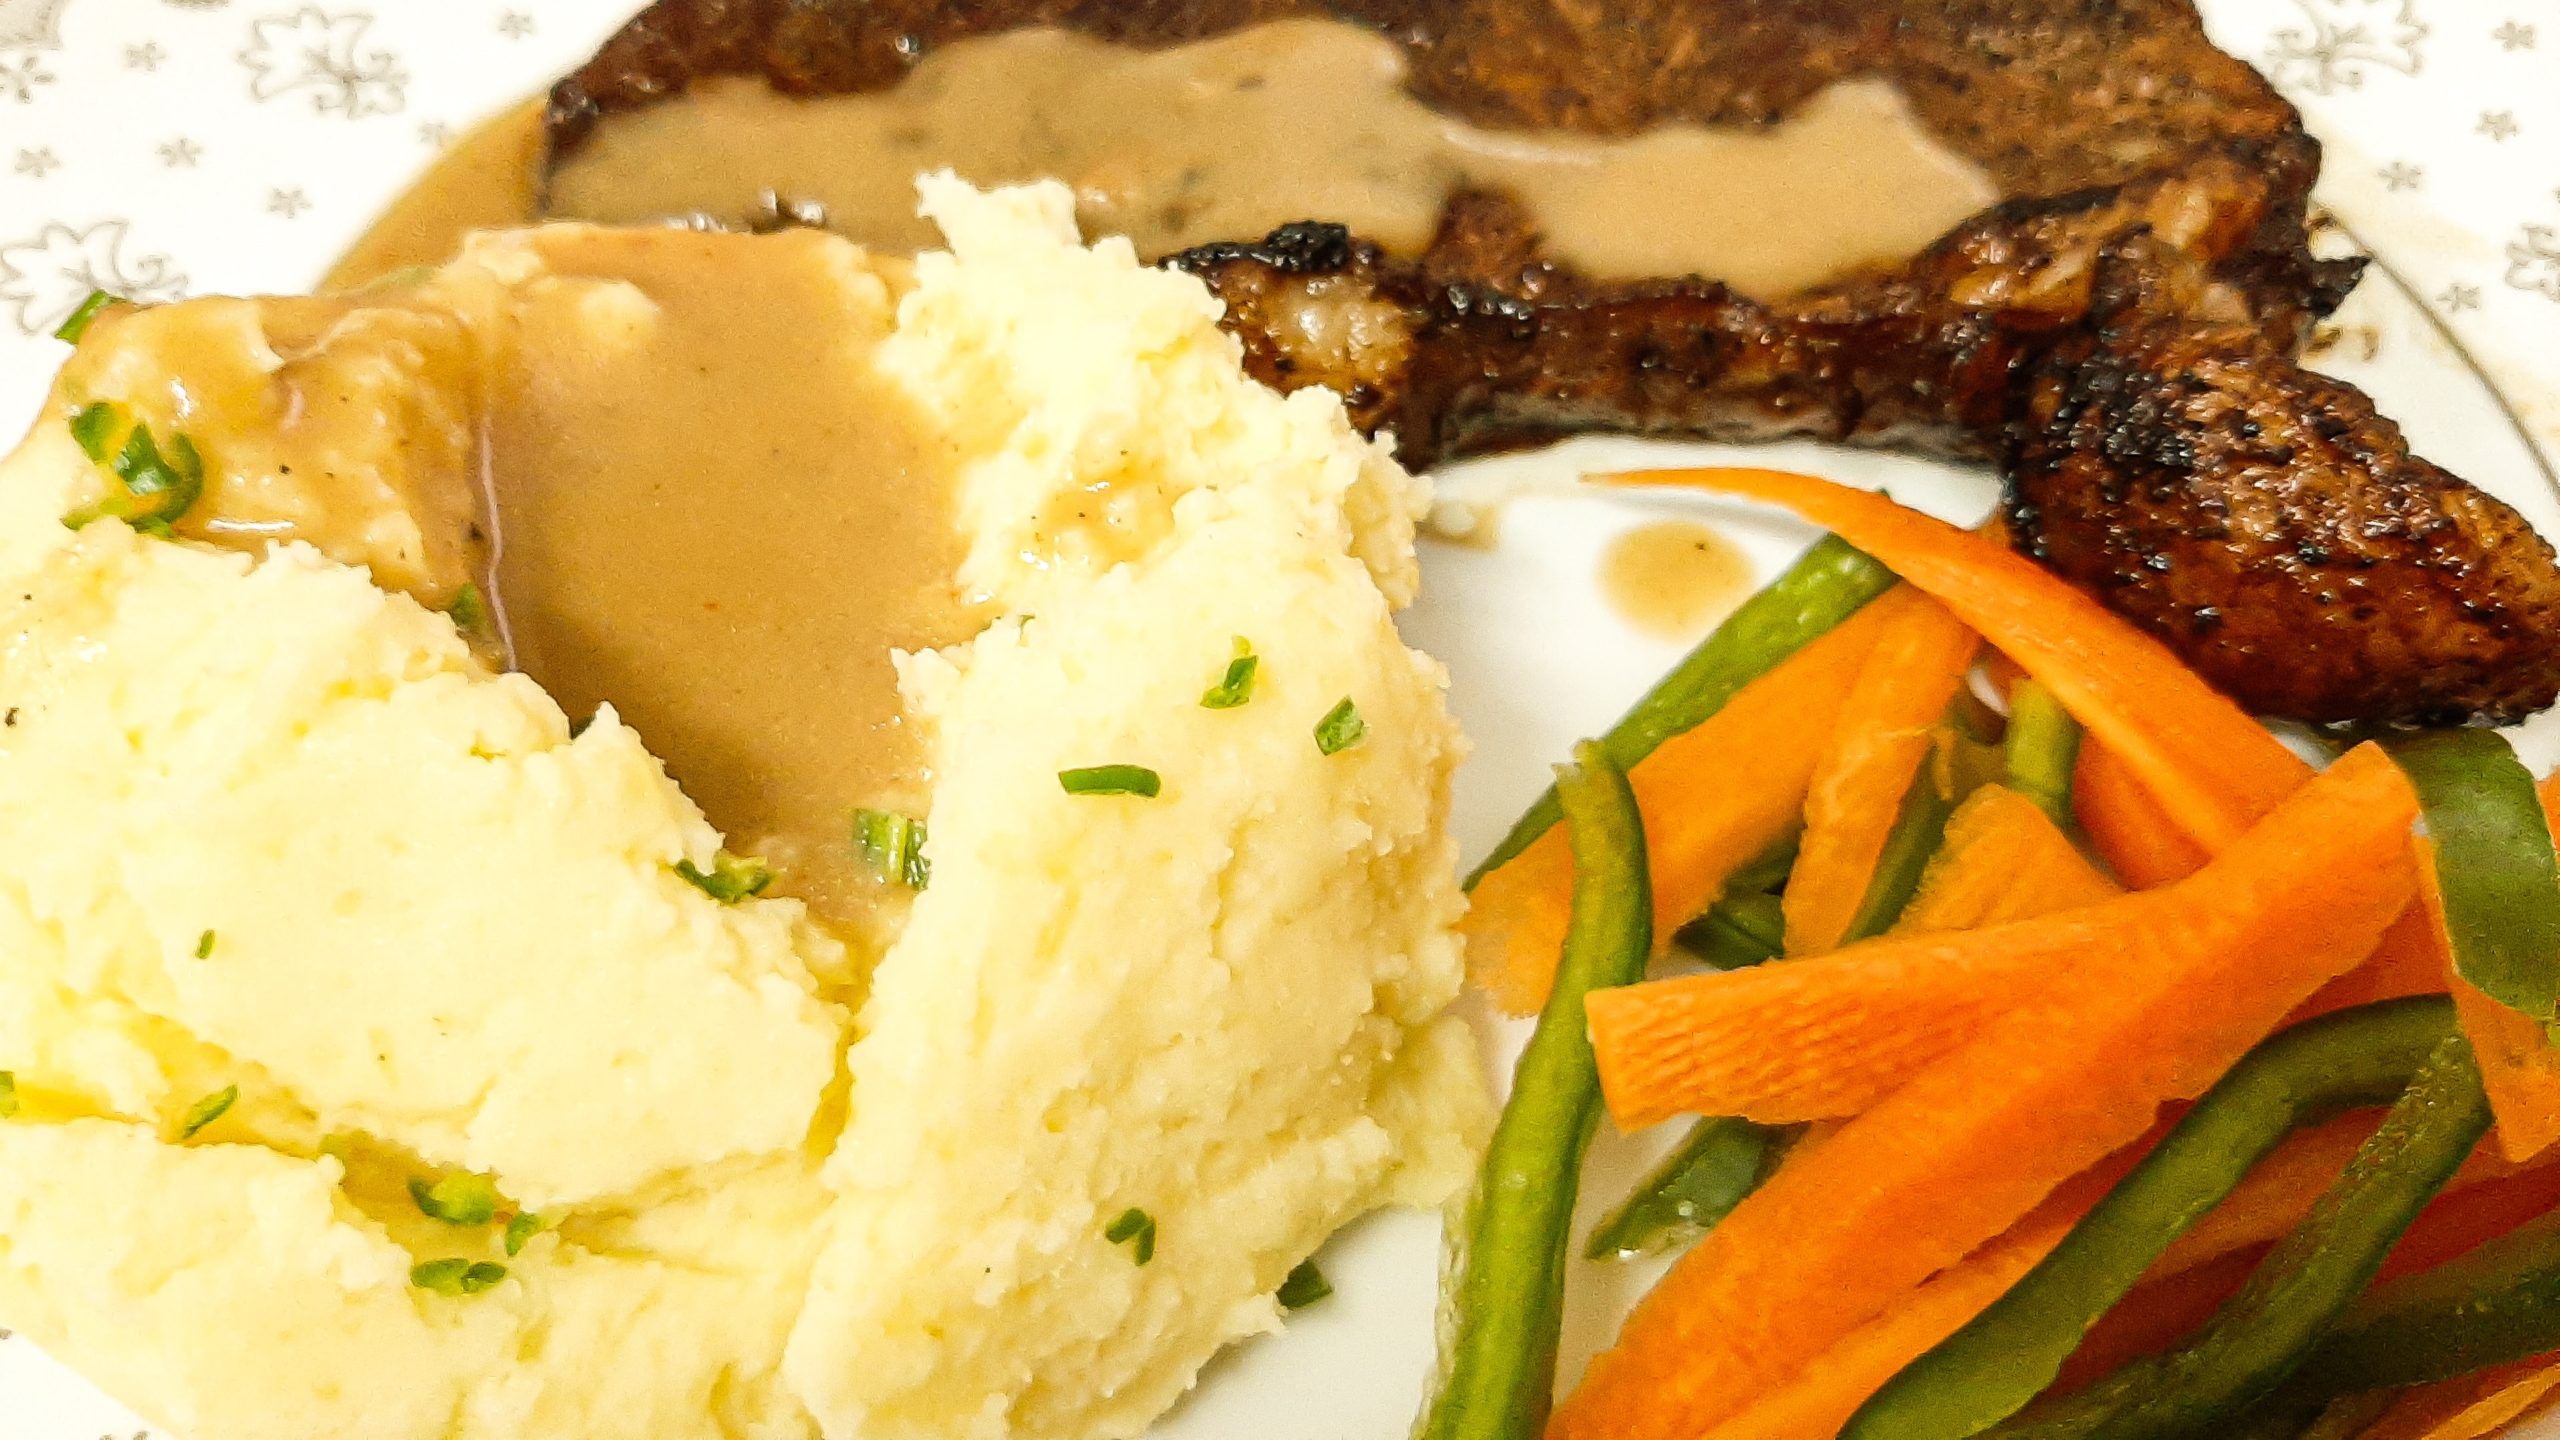 Mashed potatoes, steak and vegetables on a white plate